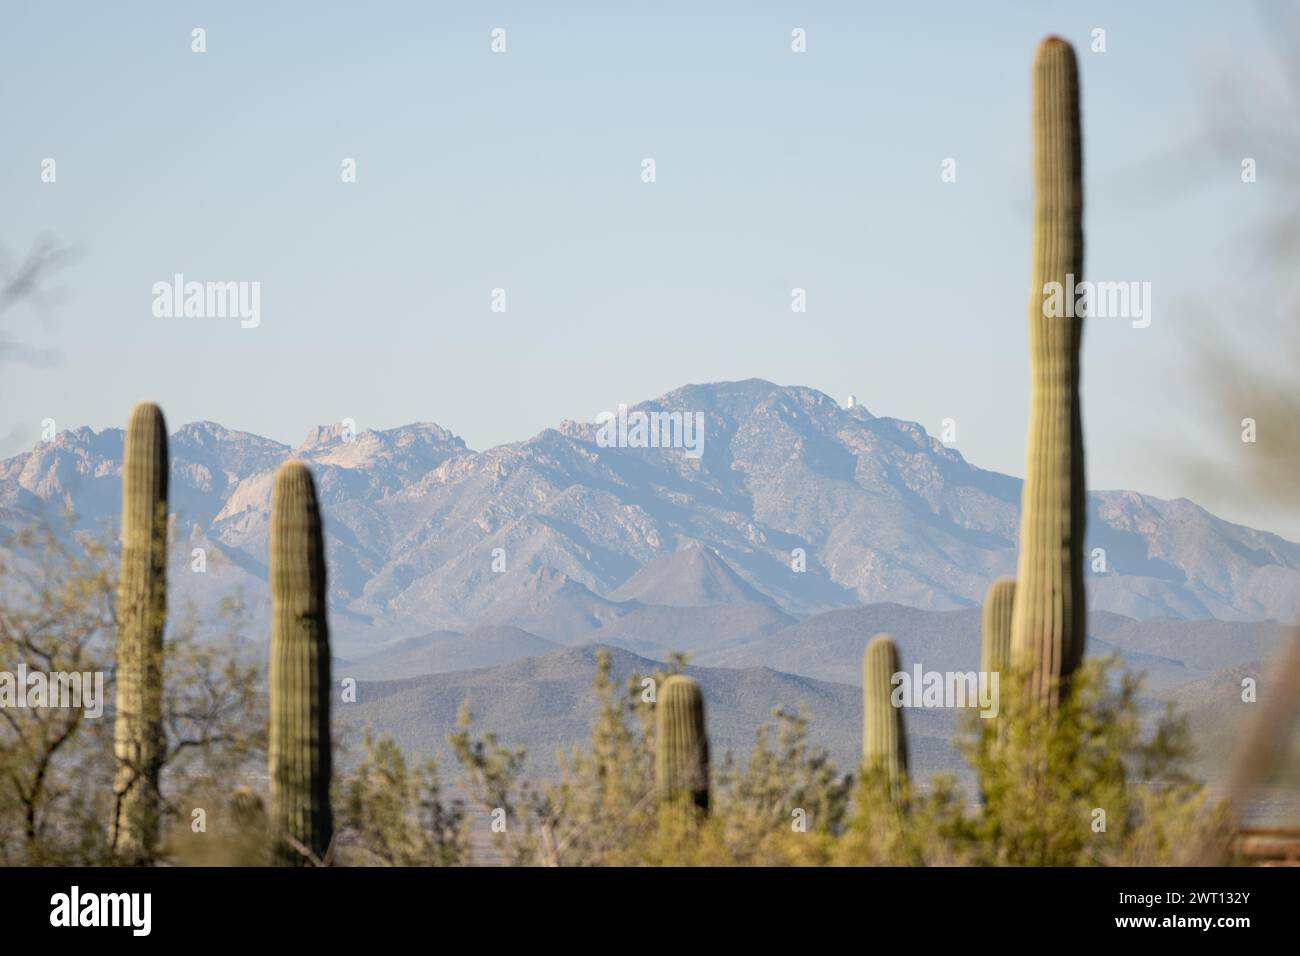 Stunning Tucson Mountainscape: A Majestic Blend of Cacti and Peaks Stock Photo